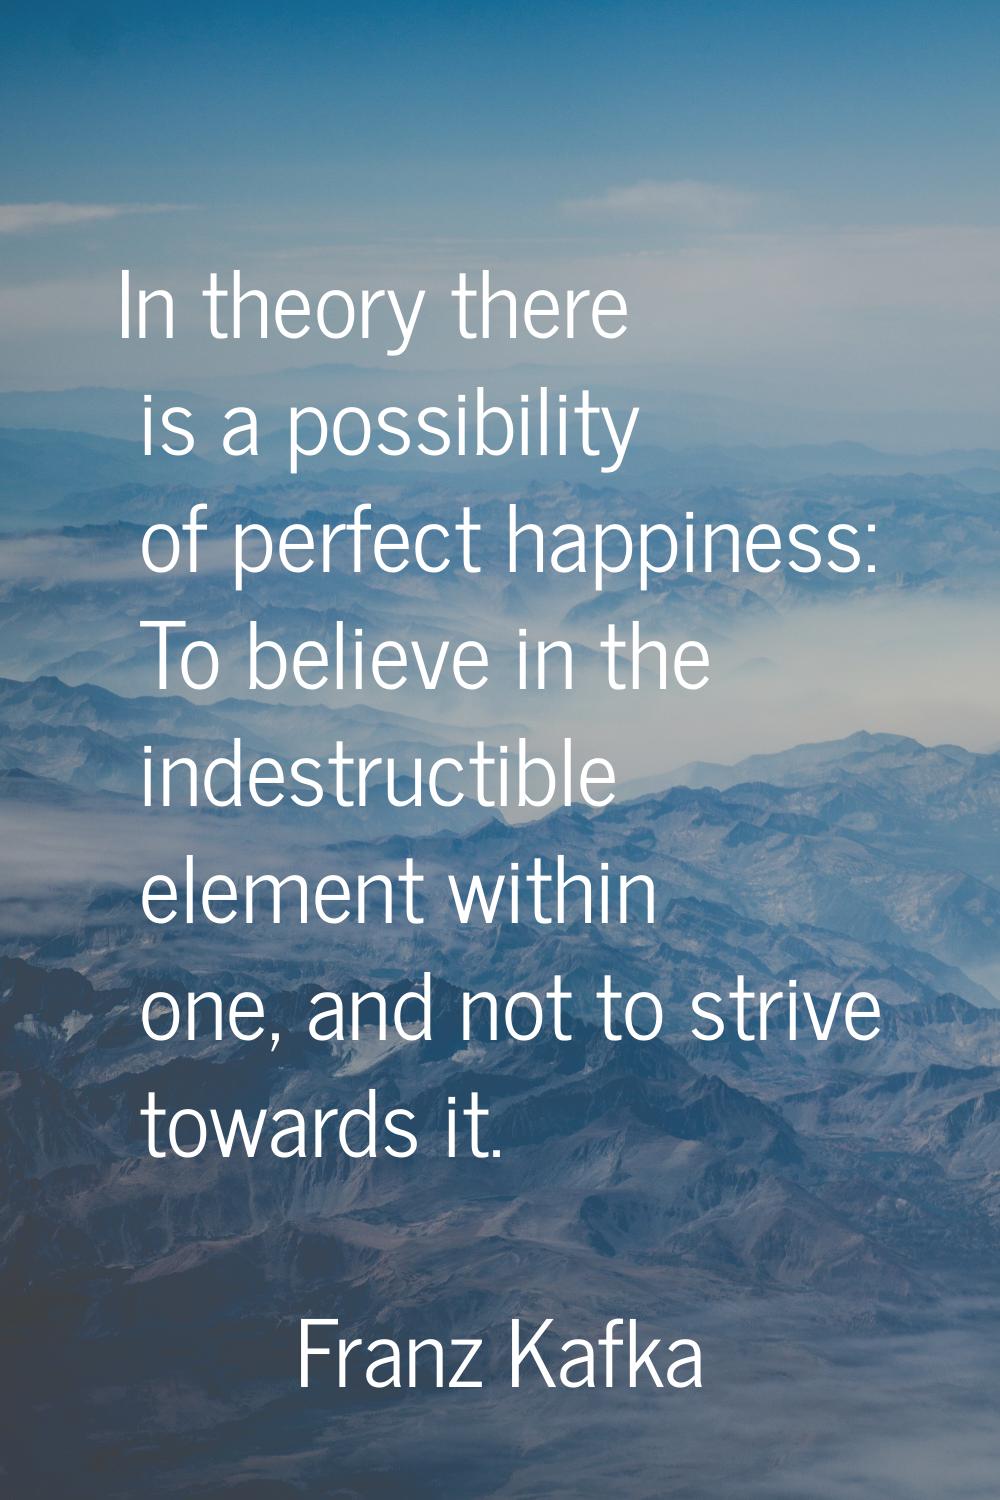 In theory there is a possibility of perfect happiness: To believe in the indestructible element wit